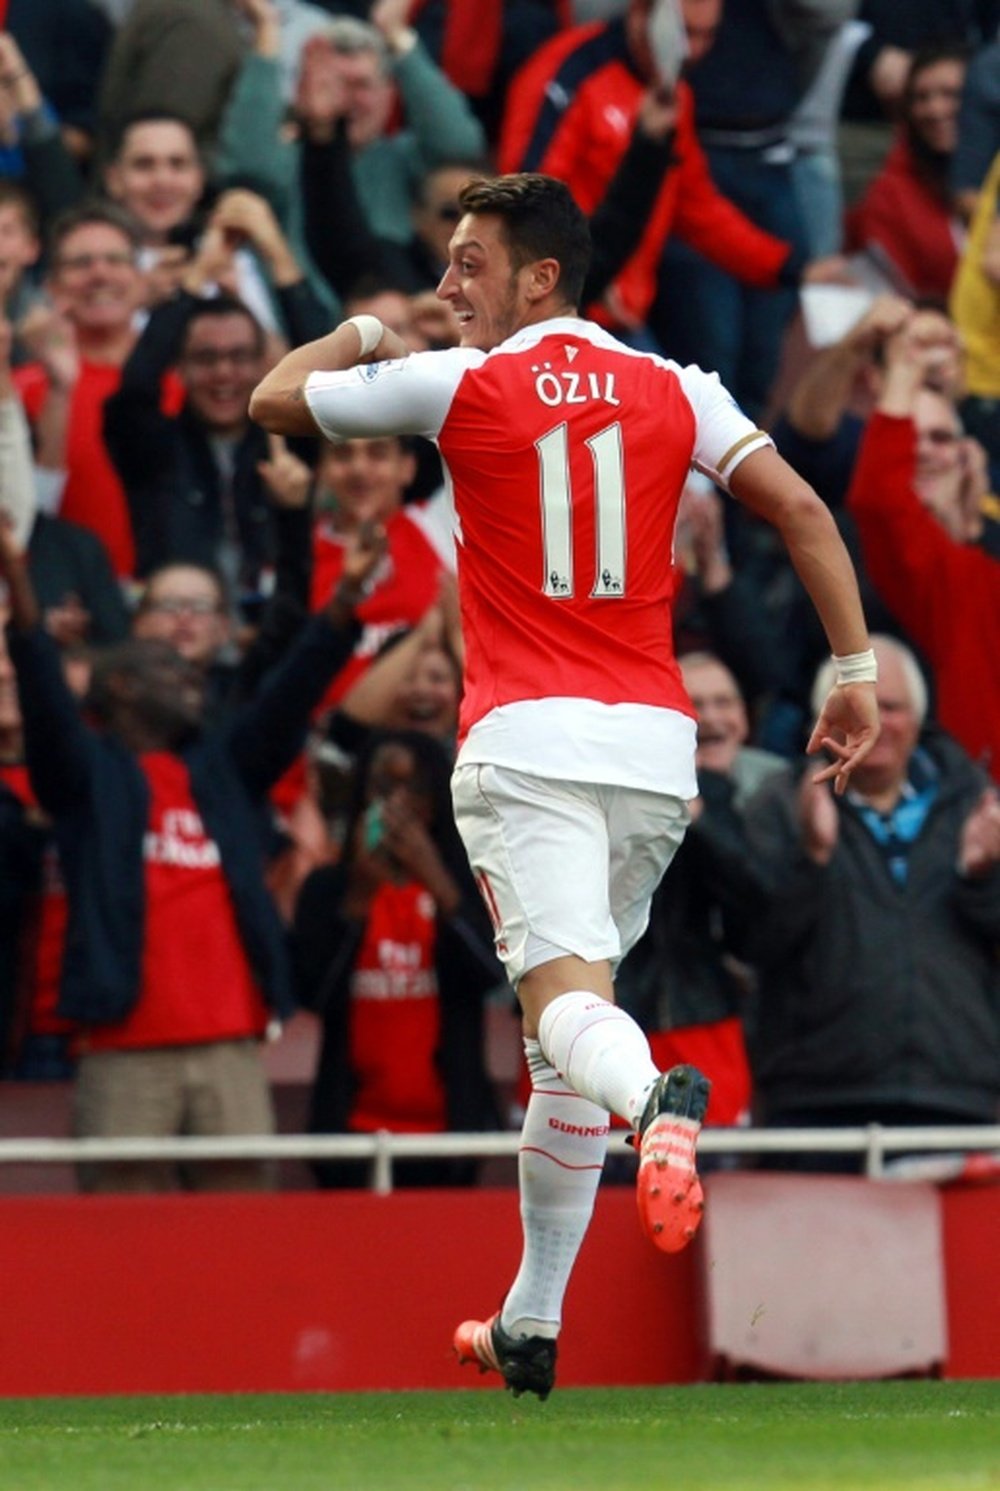 Ozil is a transfer target for Manchester United. AFP